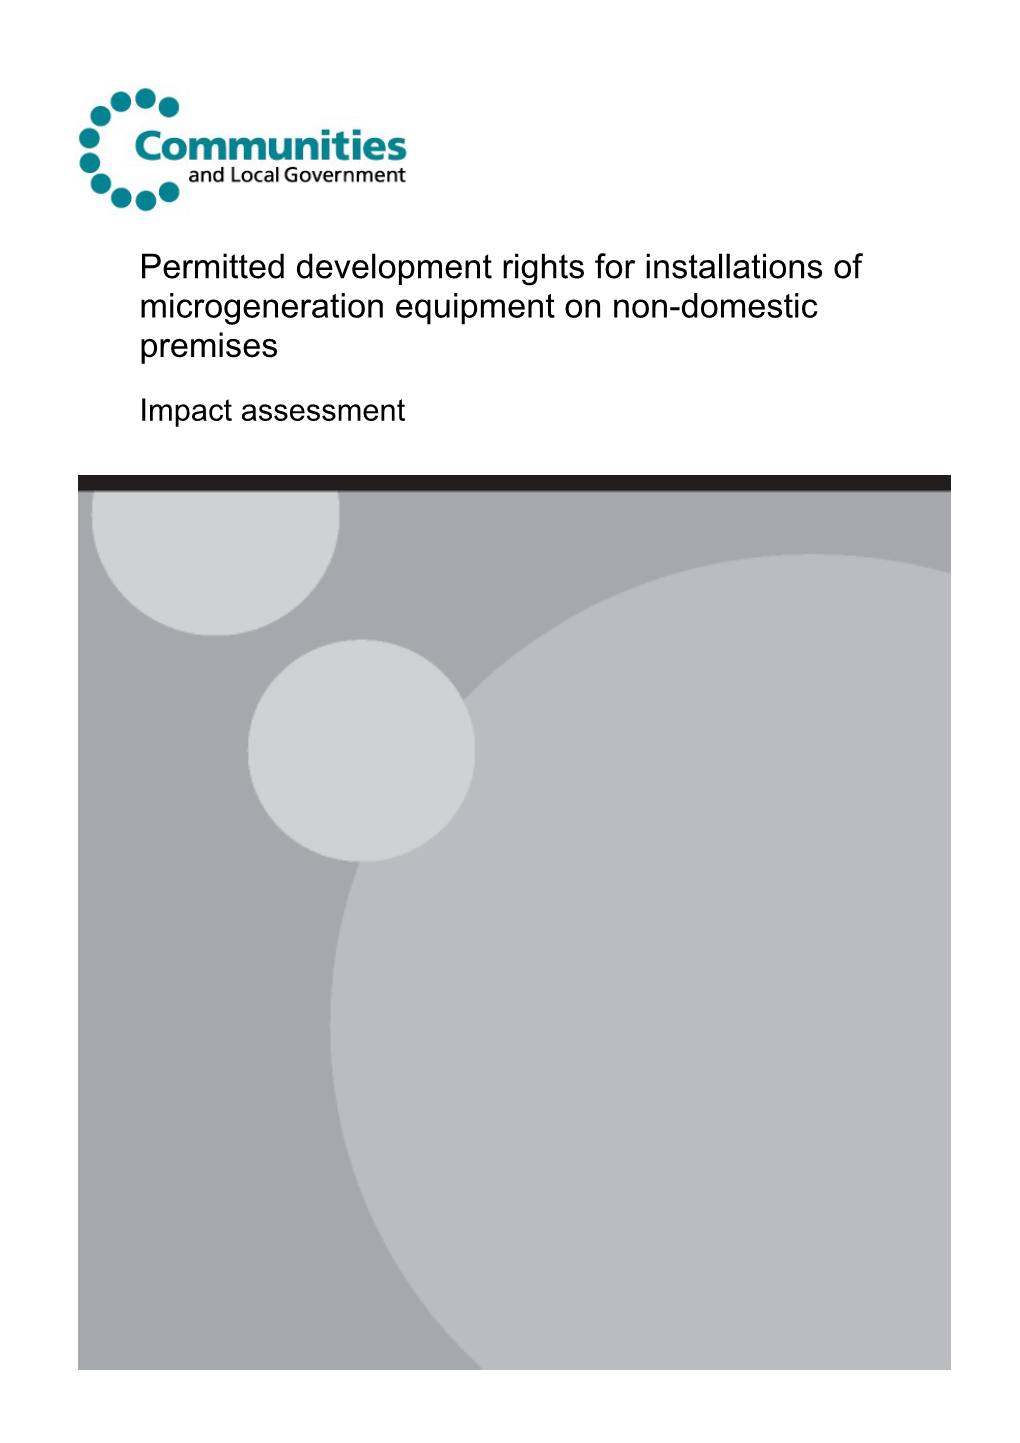 Permitted Development Rights for Installations of Microgeneration Equipment on Non-Domestic Premises